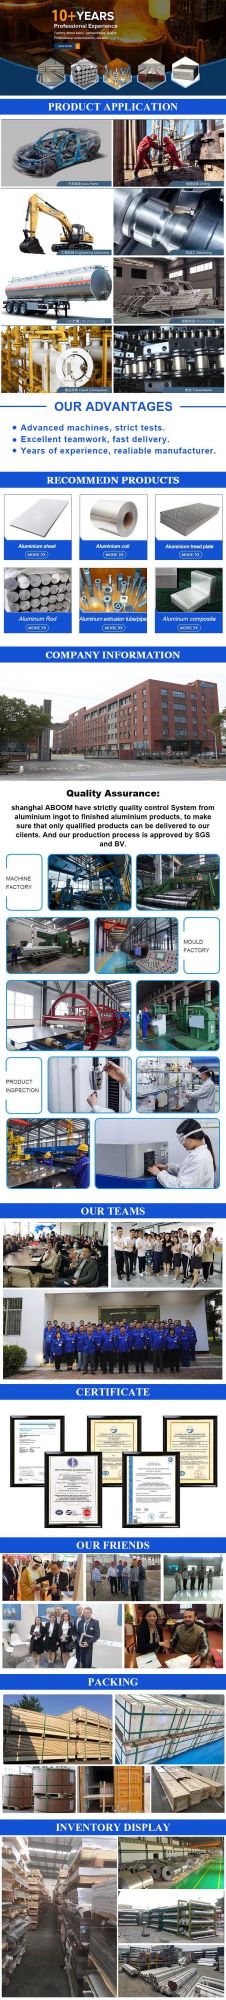 SAE/AISI 1008/1010 Coil Stainless Steel Coil